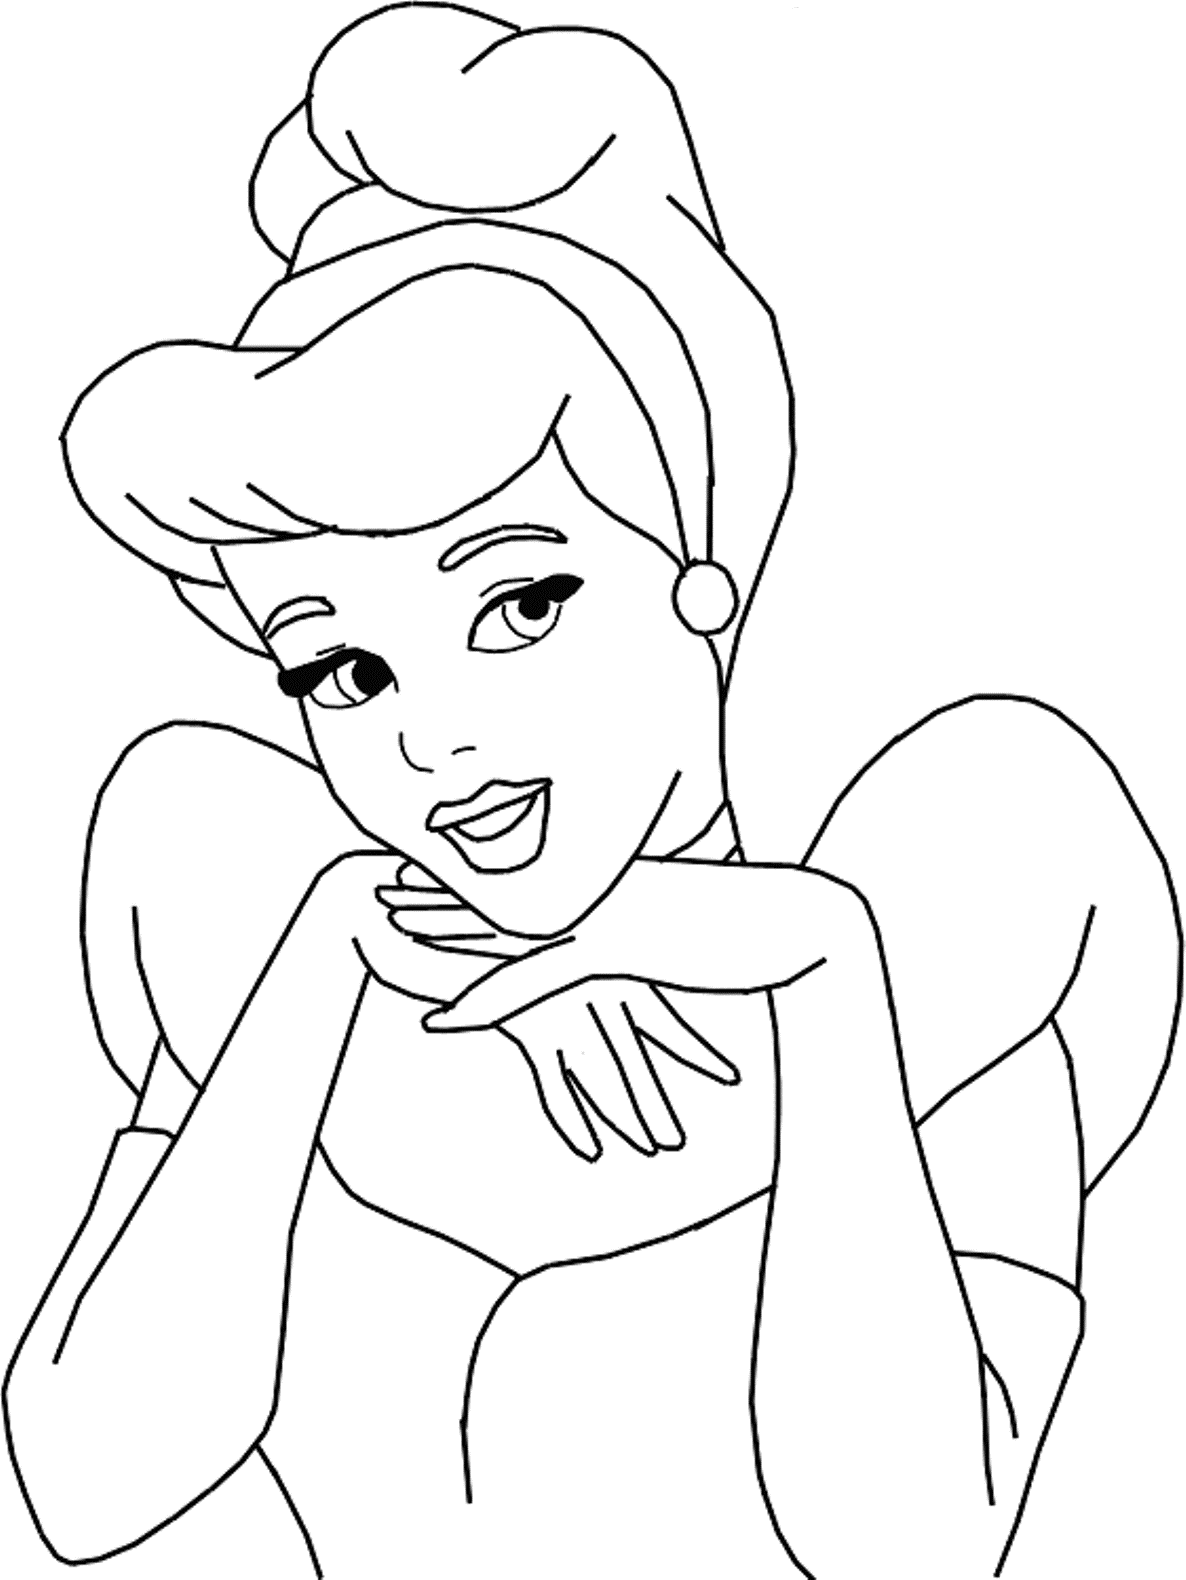 Cinderella Coloring Pages For Kids Printable | Cartoon Coloring ...